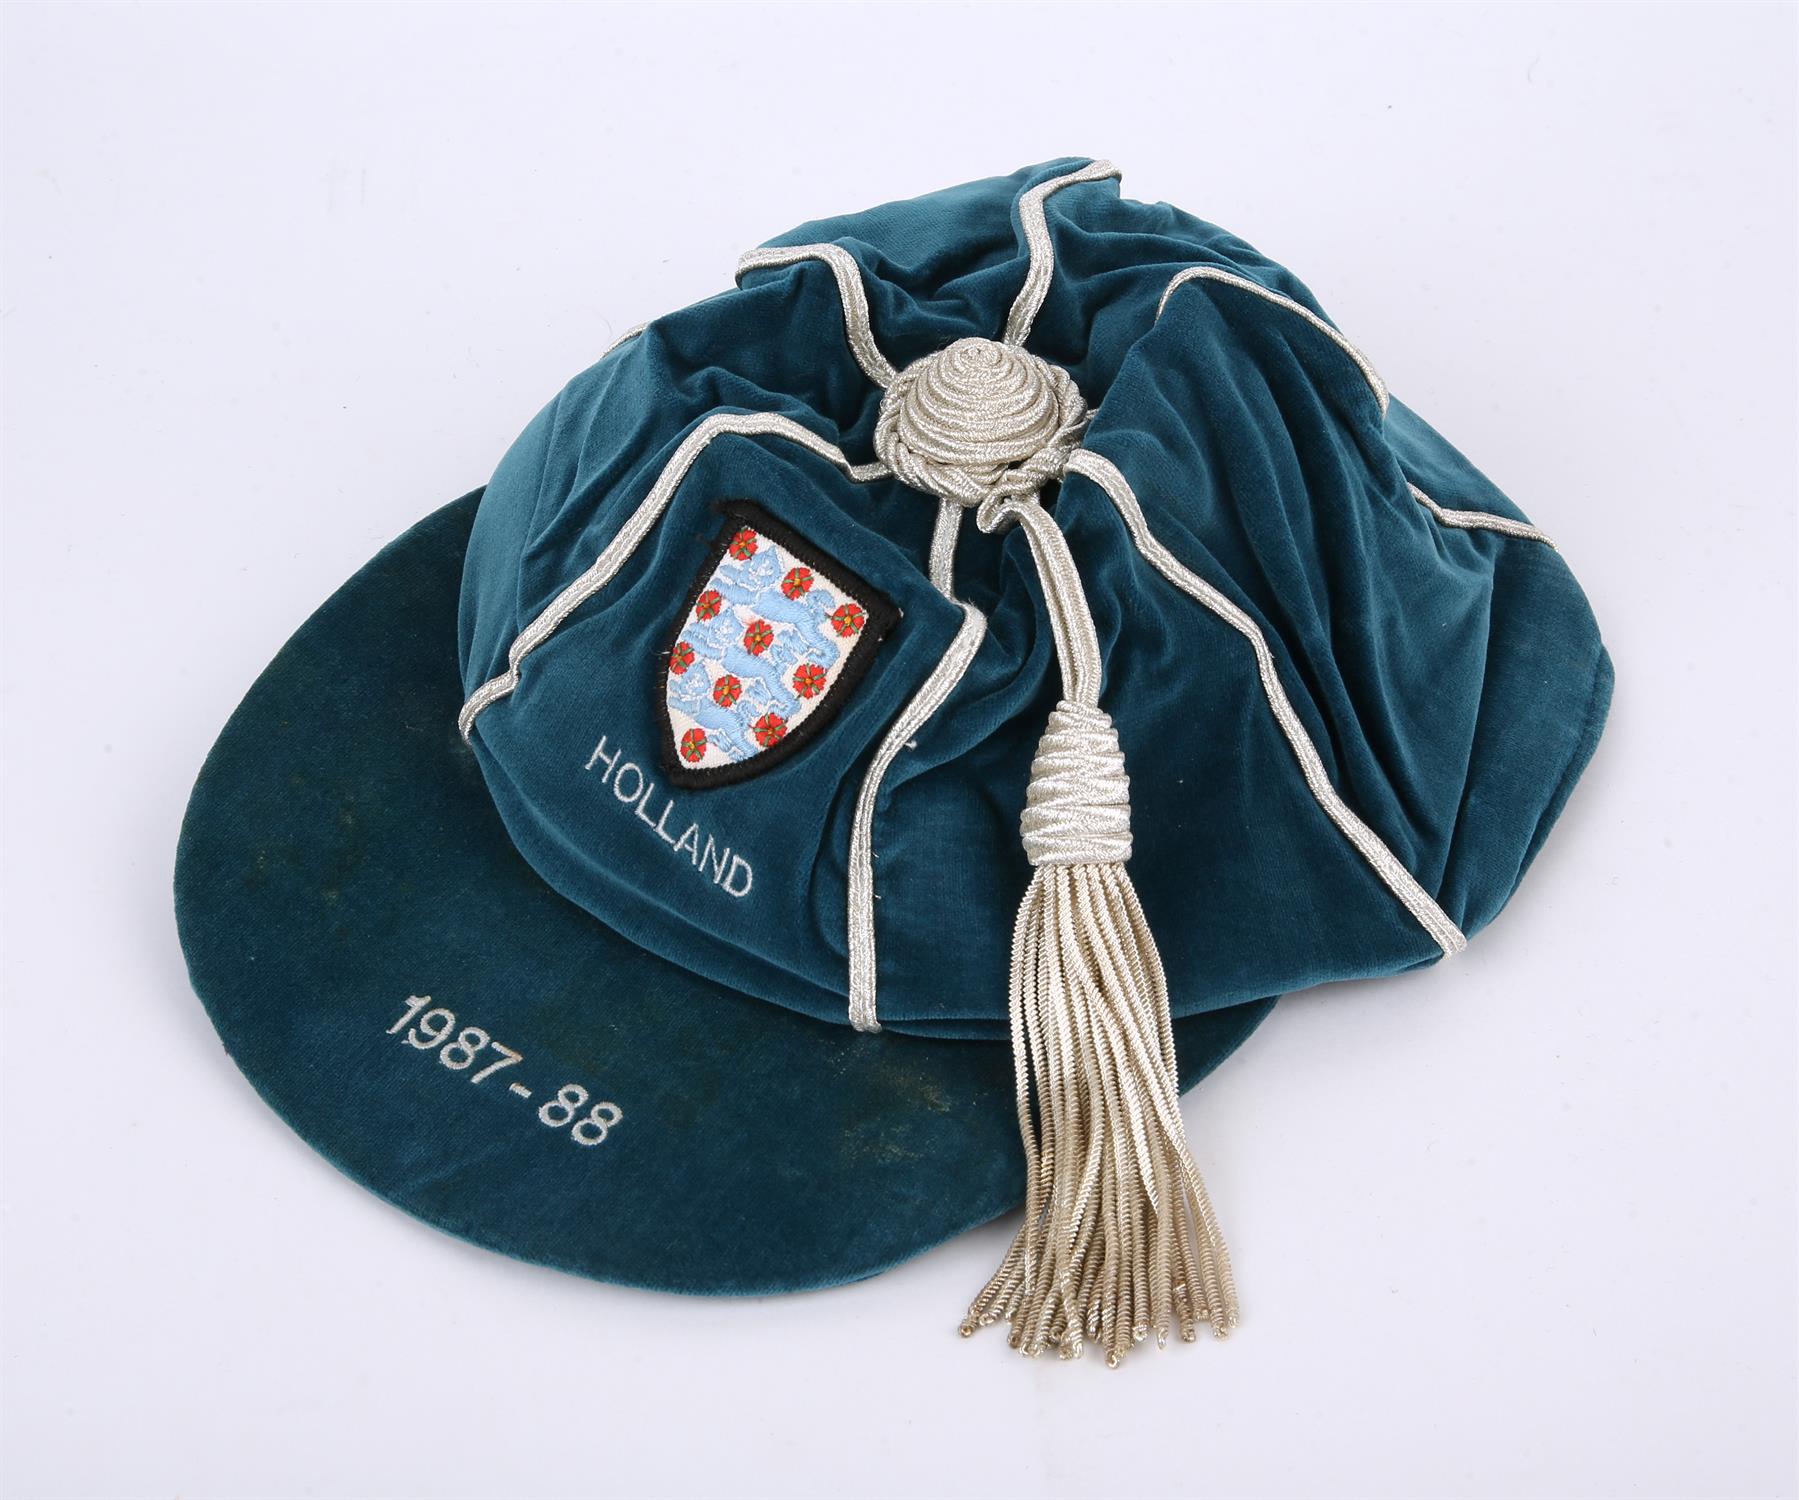 Peter Shilton England cap from the 1987-88 International friendly against Holland at Wembley